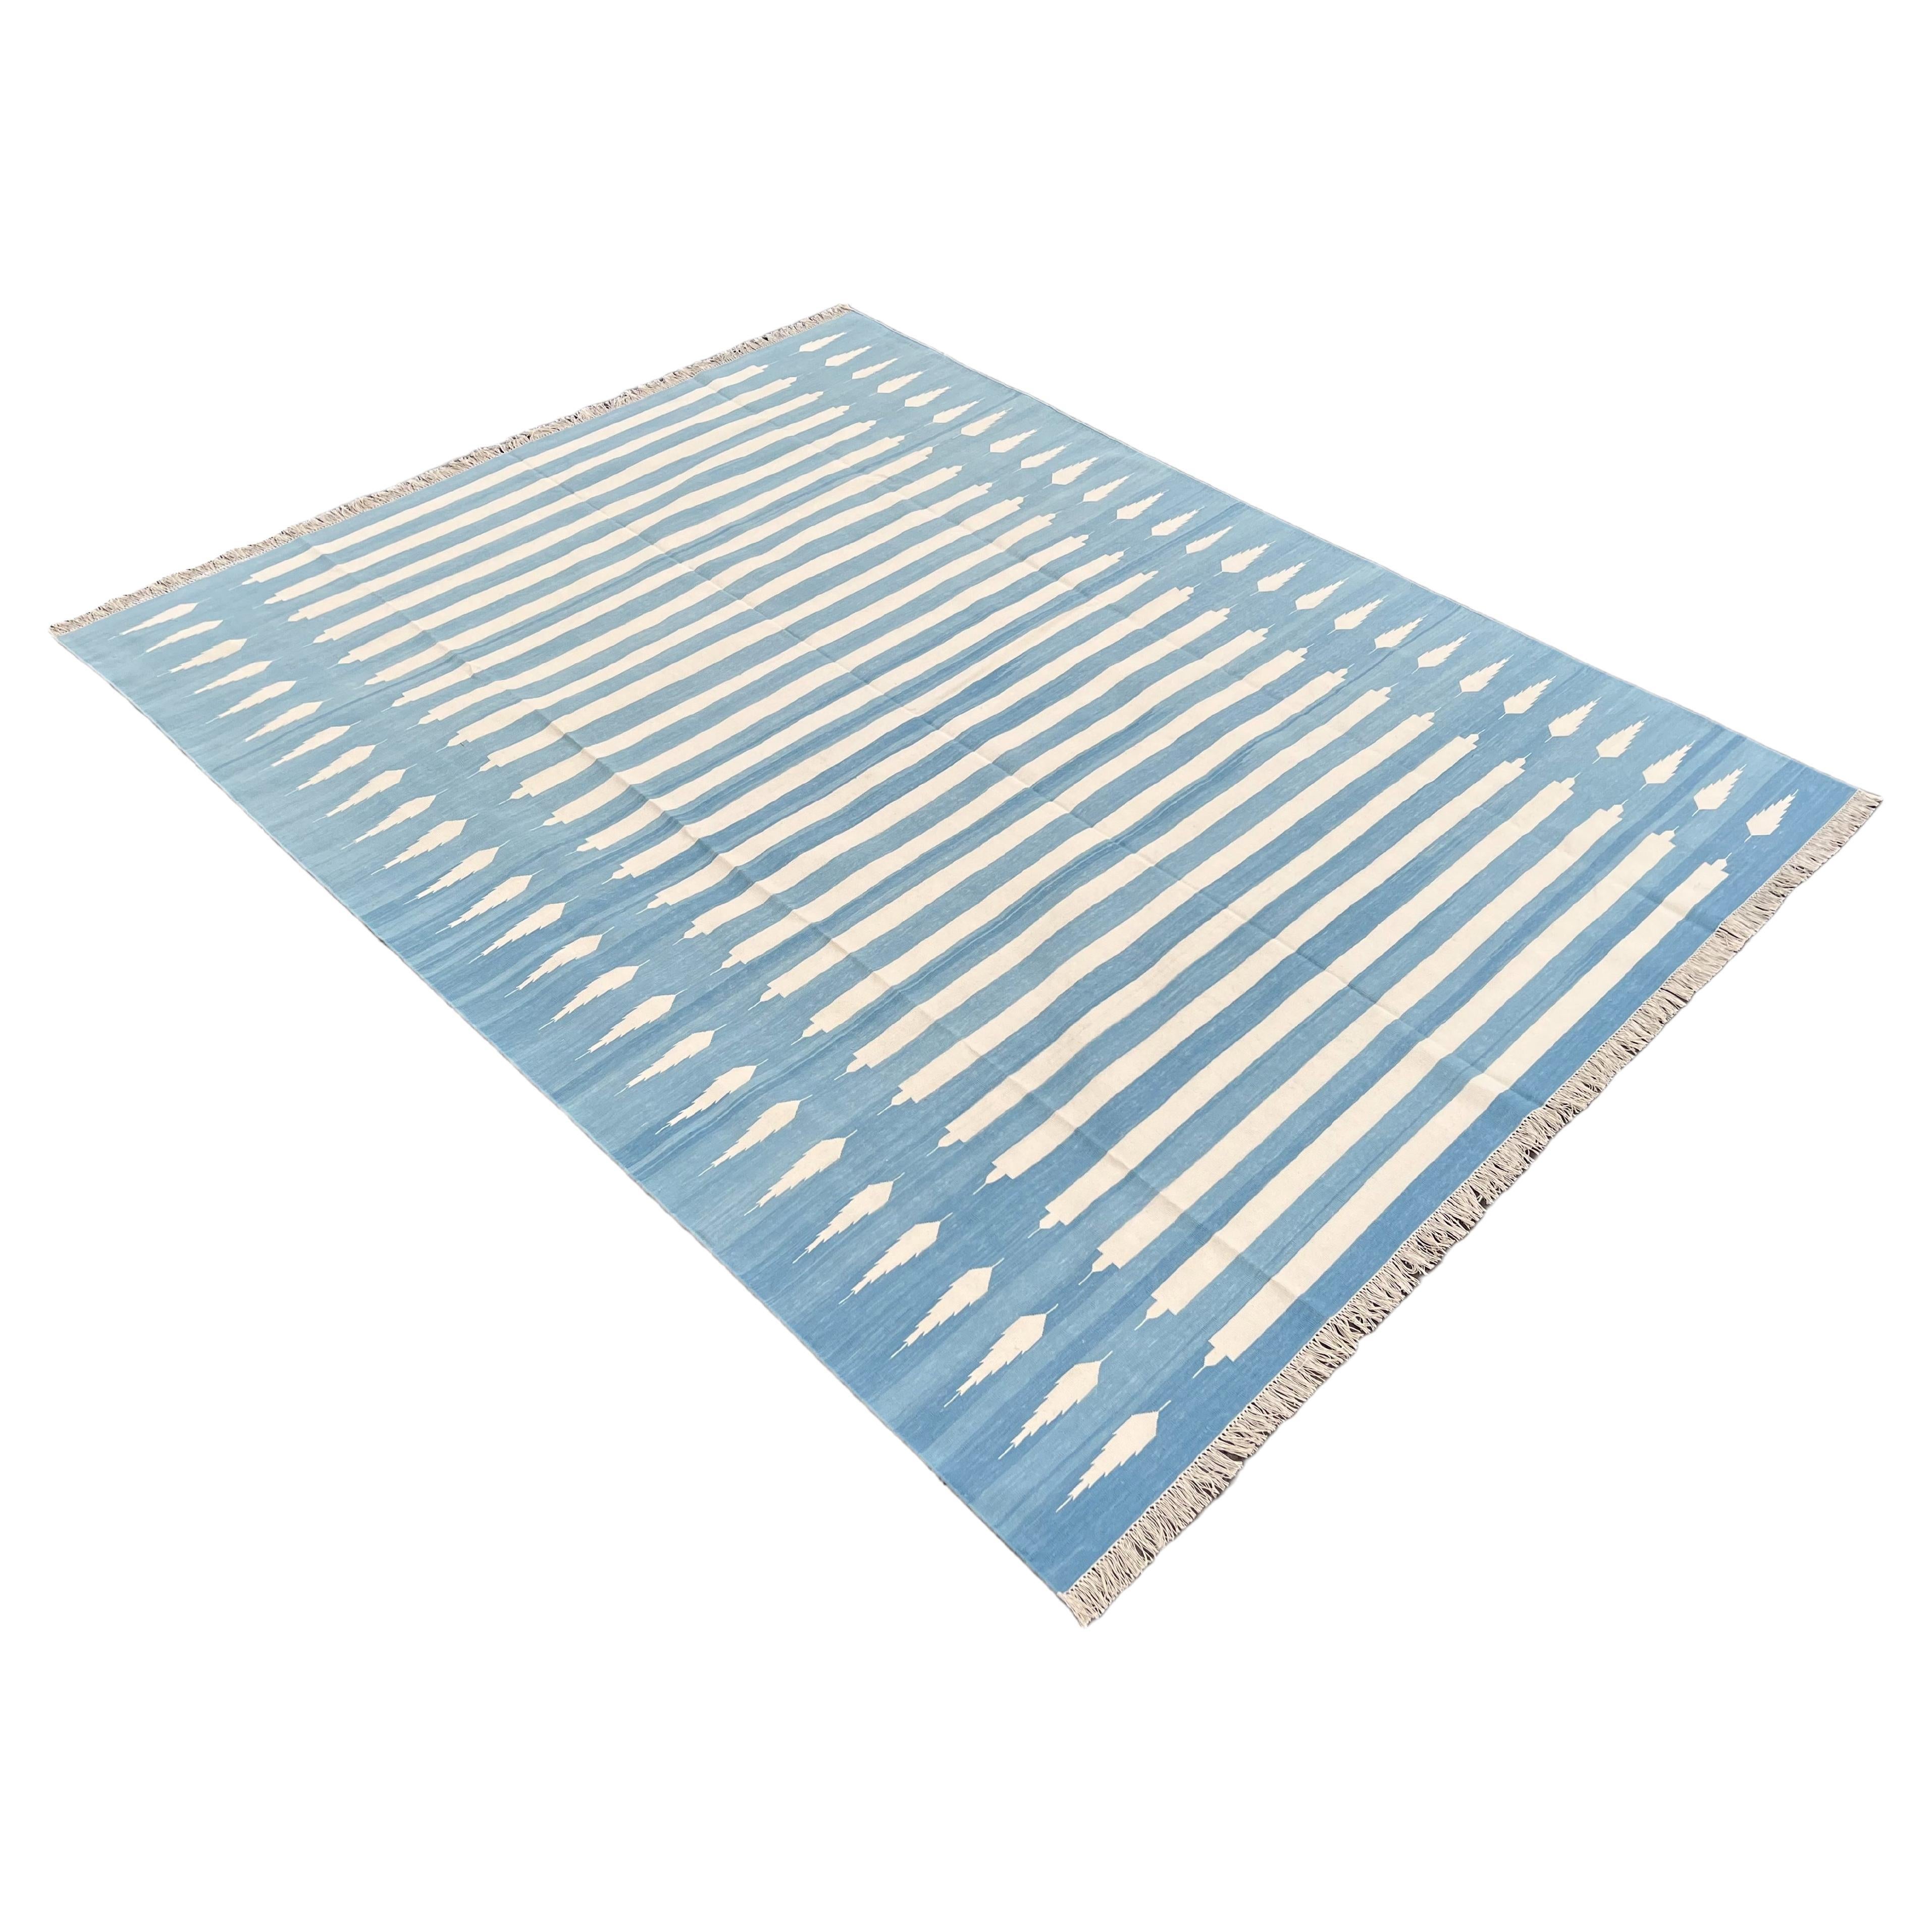 Handmade Cotton Area Flat Weave Rug, Blue And White Striped Indian Dhurrie Rug